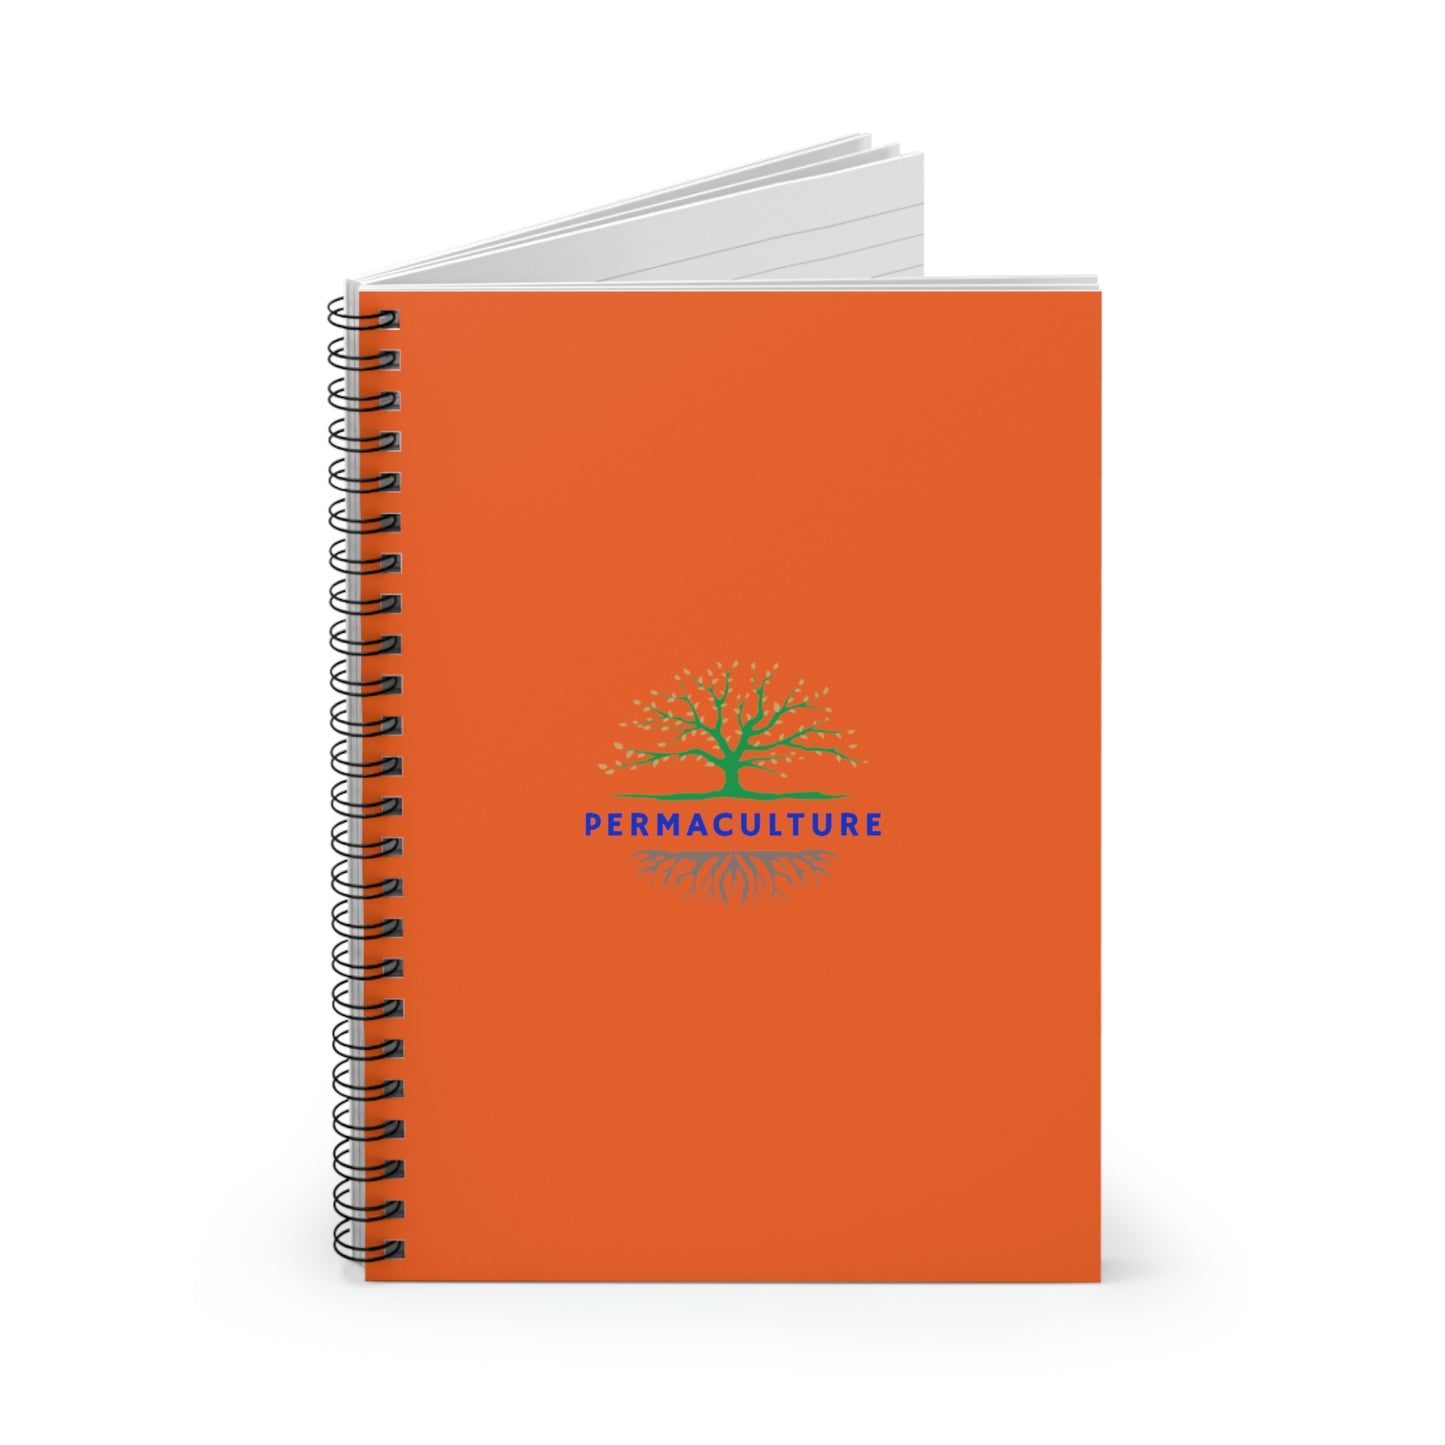 Permaculture - Spiral Notebook - Ruled Line - Blue Cover